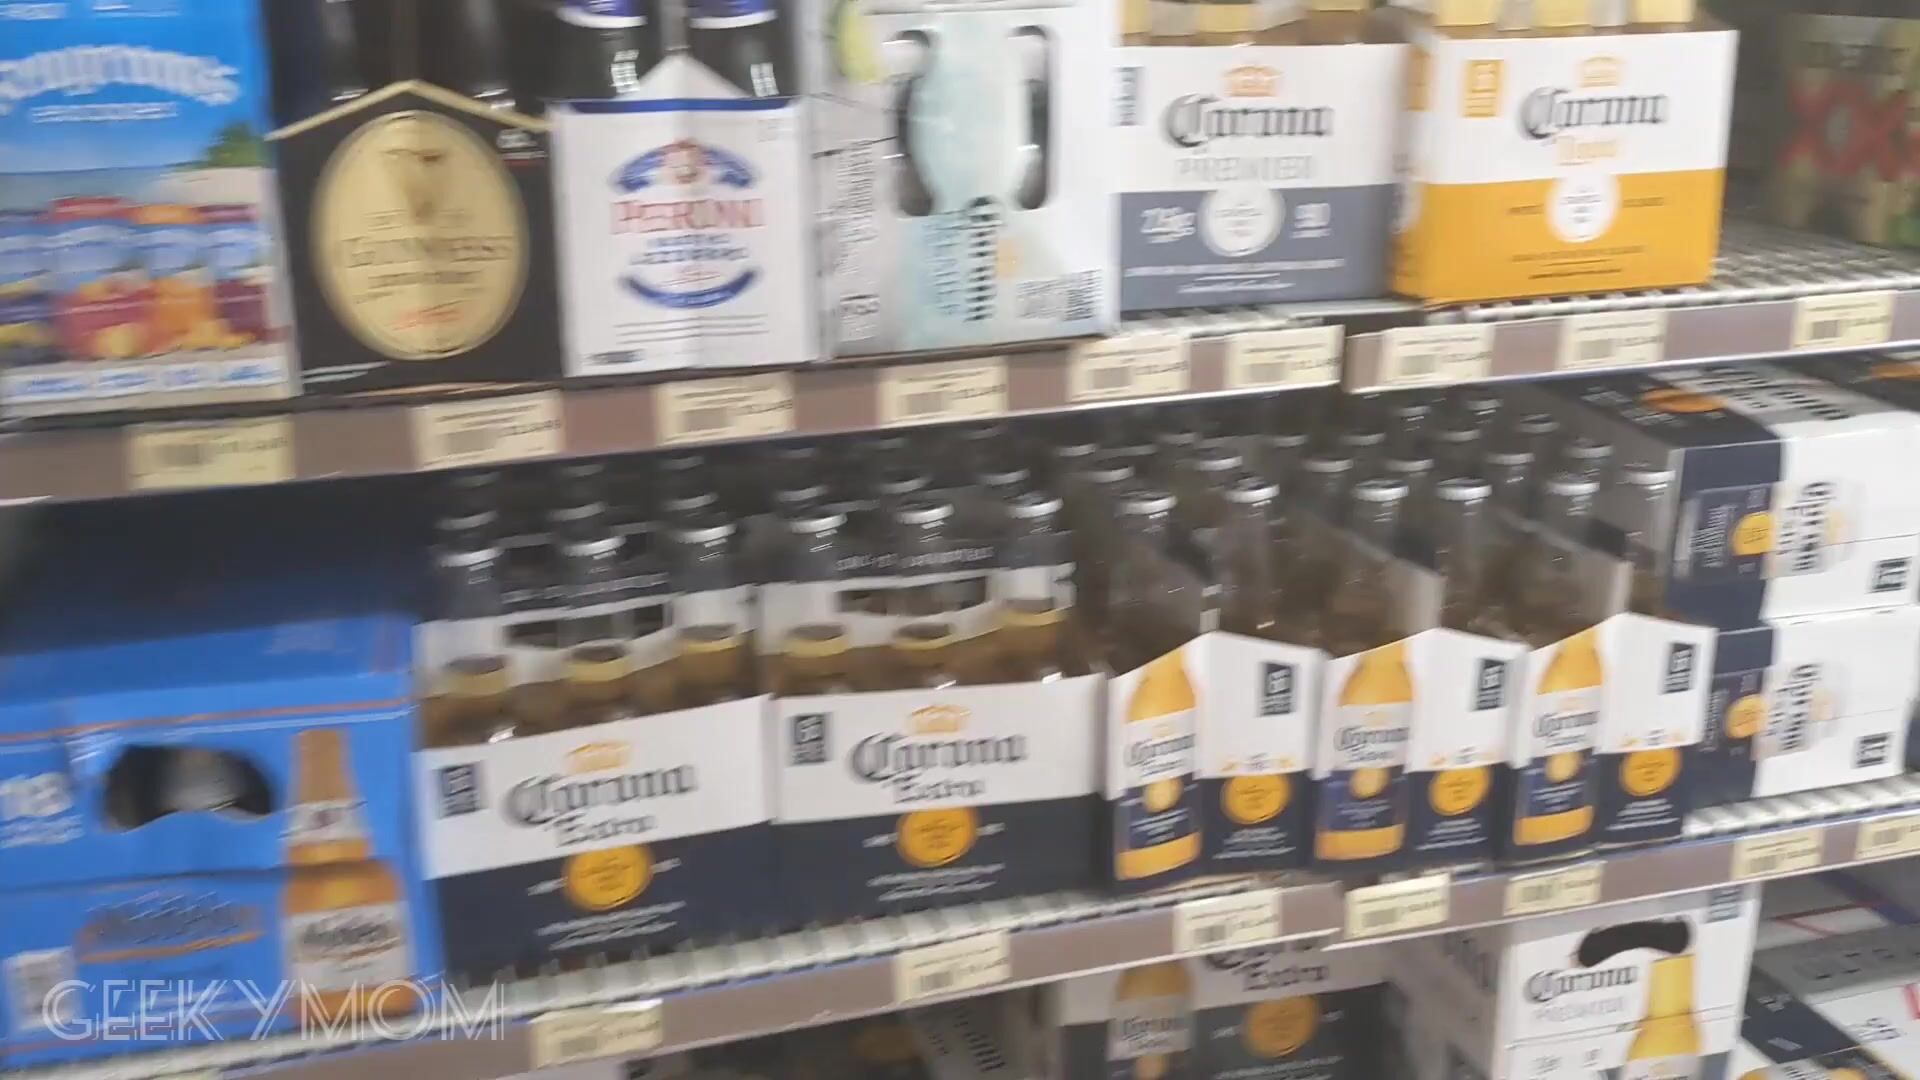 Caught flashing my butt plug in the beer freezer